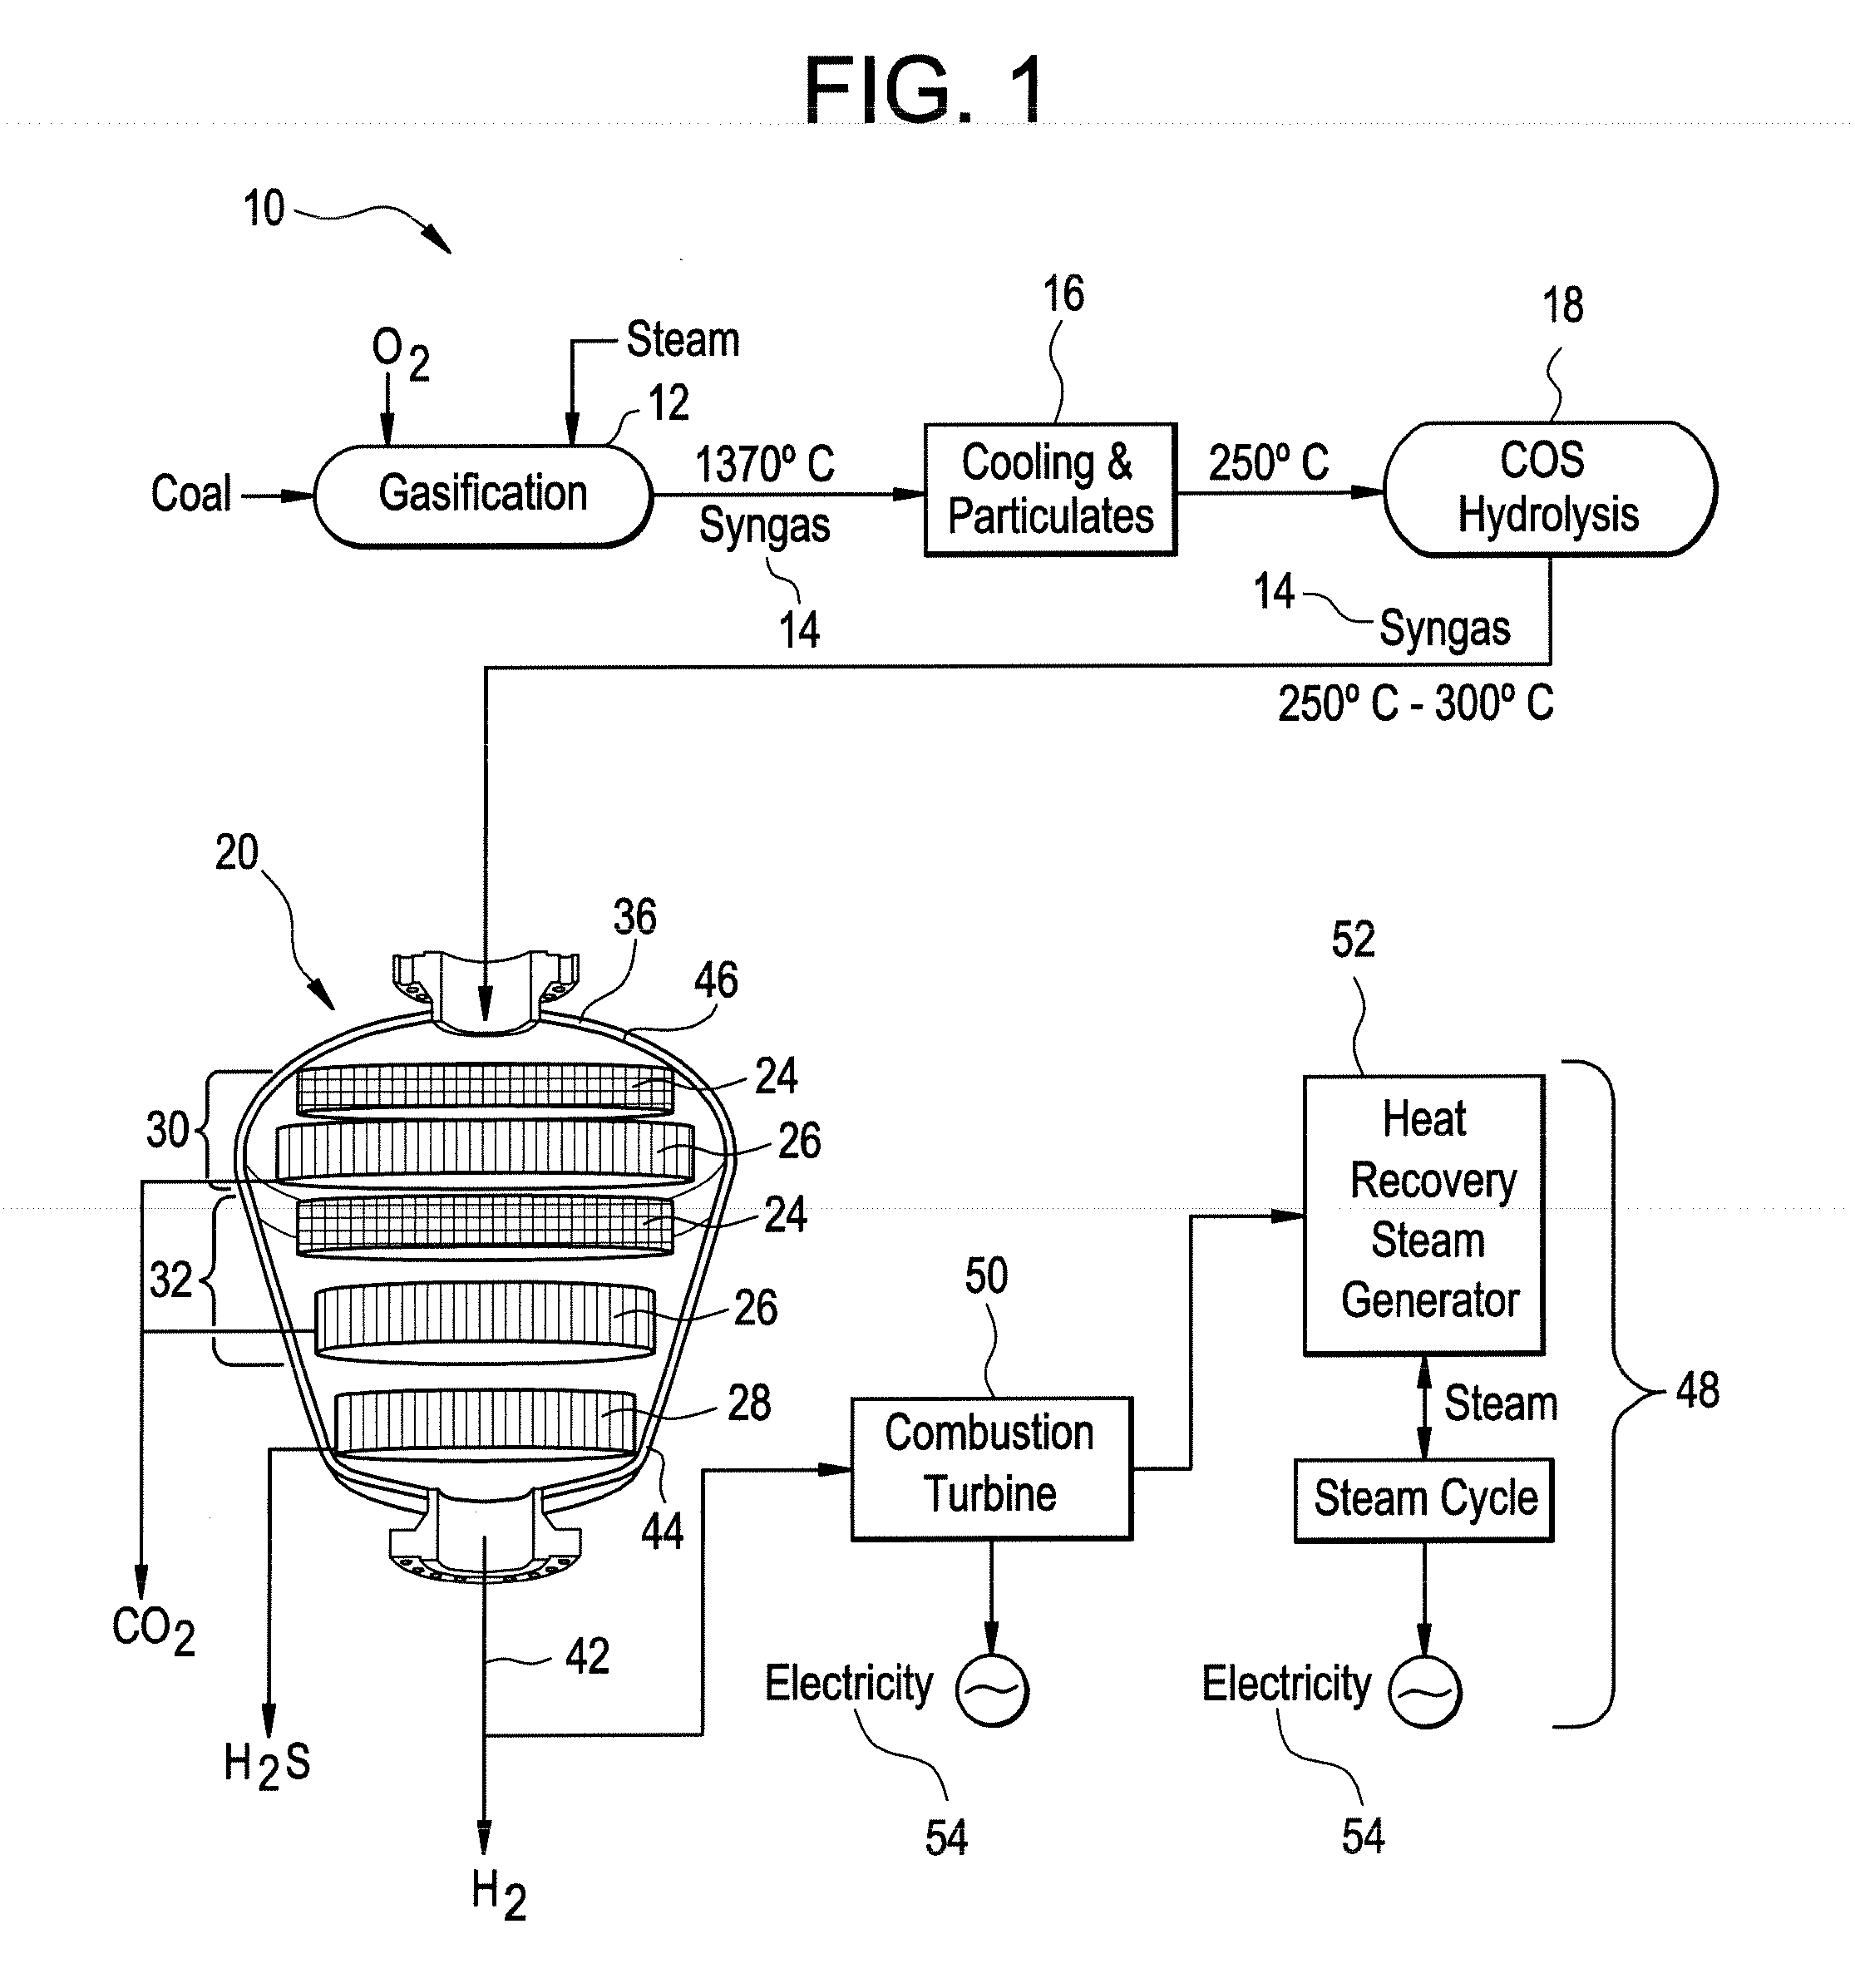 Methods and Apparatus for Carbon Dioxide Removal from a Fluid Stream